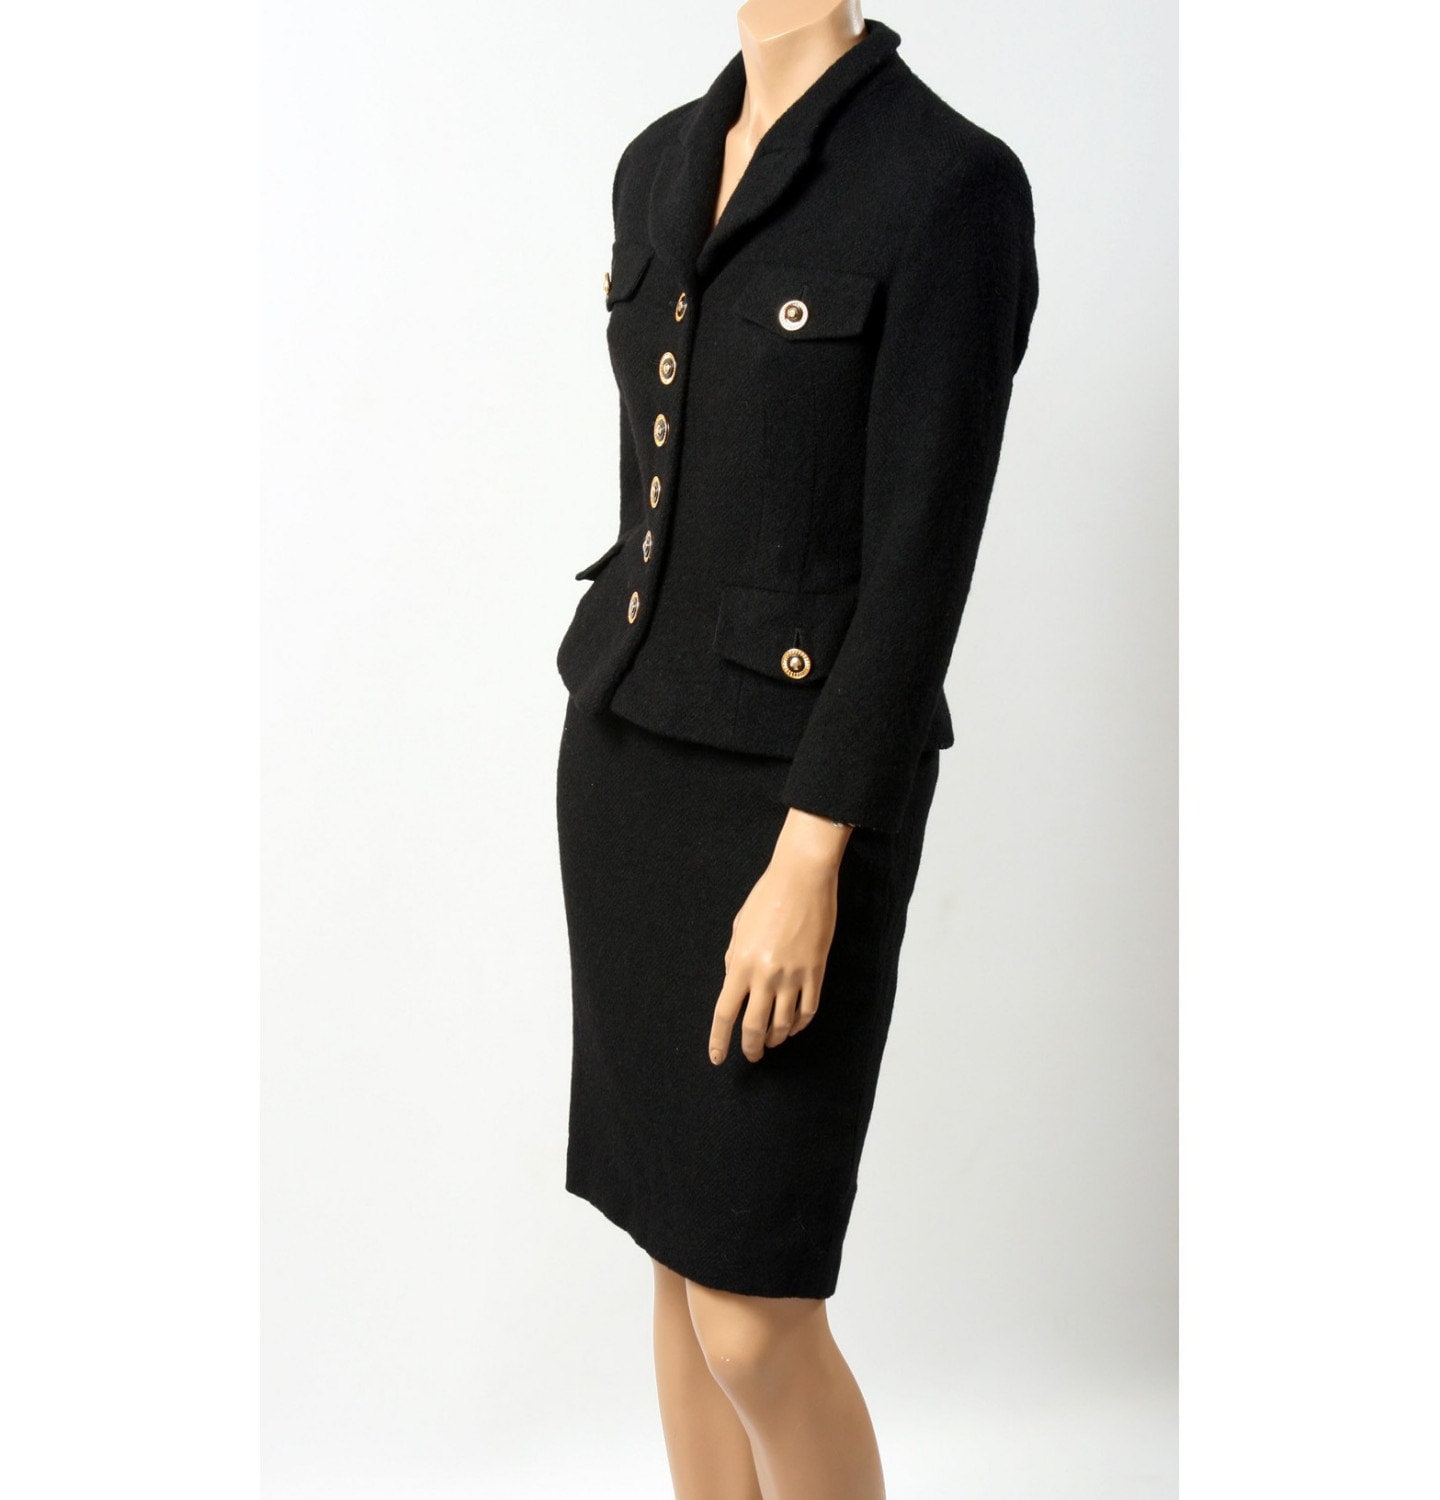 Coco CHANEL style vintage black woman suit with by BetaBoutique